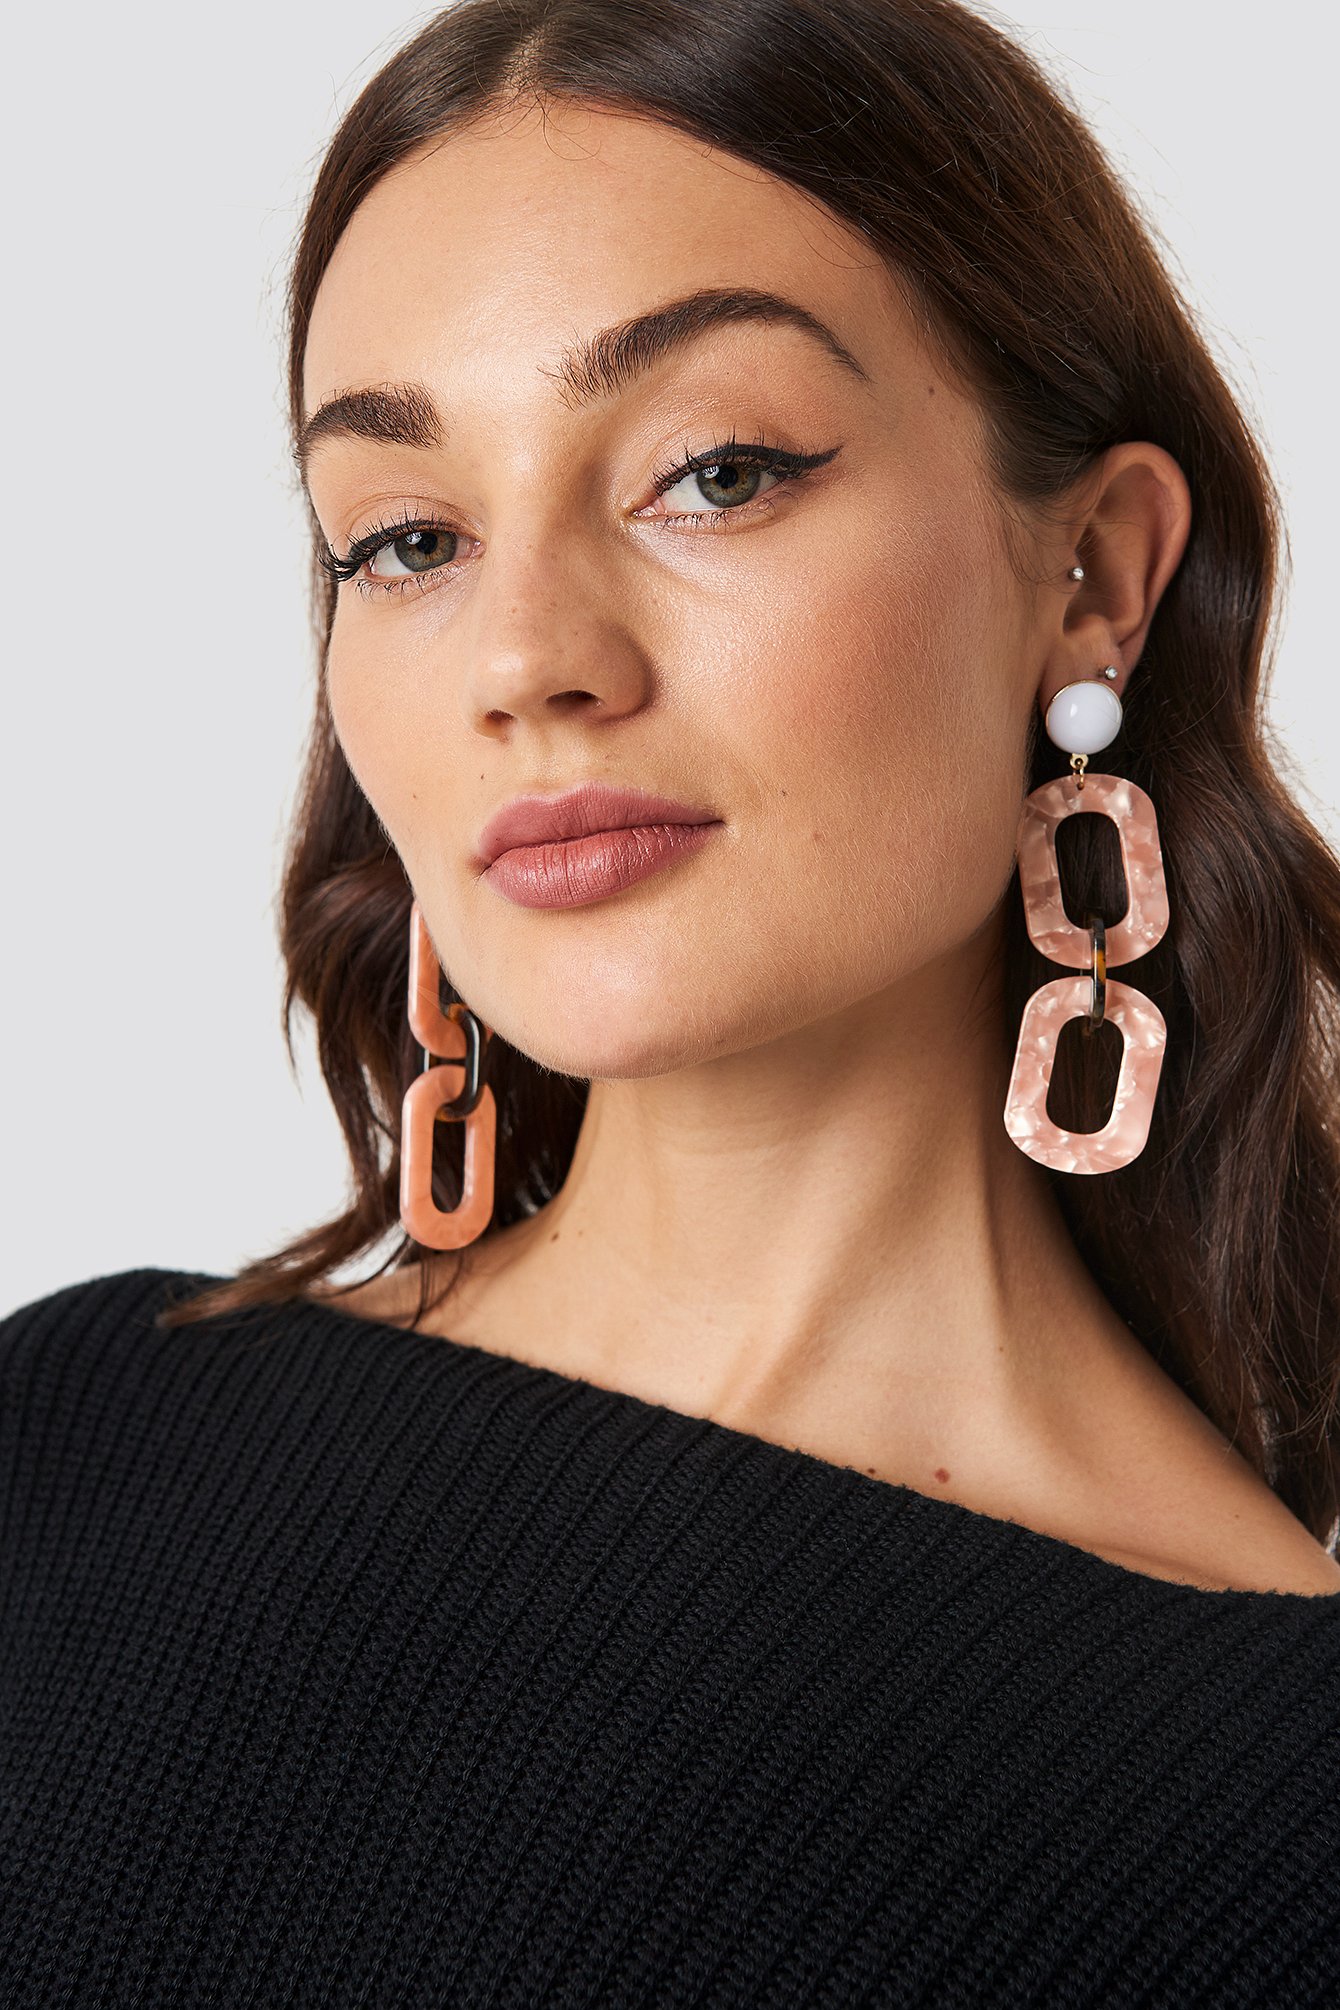 The Chained Resin Look Earrings by NA-KD Accessories features a dangling design with chained resin hoops, and a bullet clutch backing.